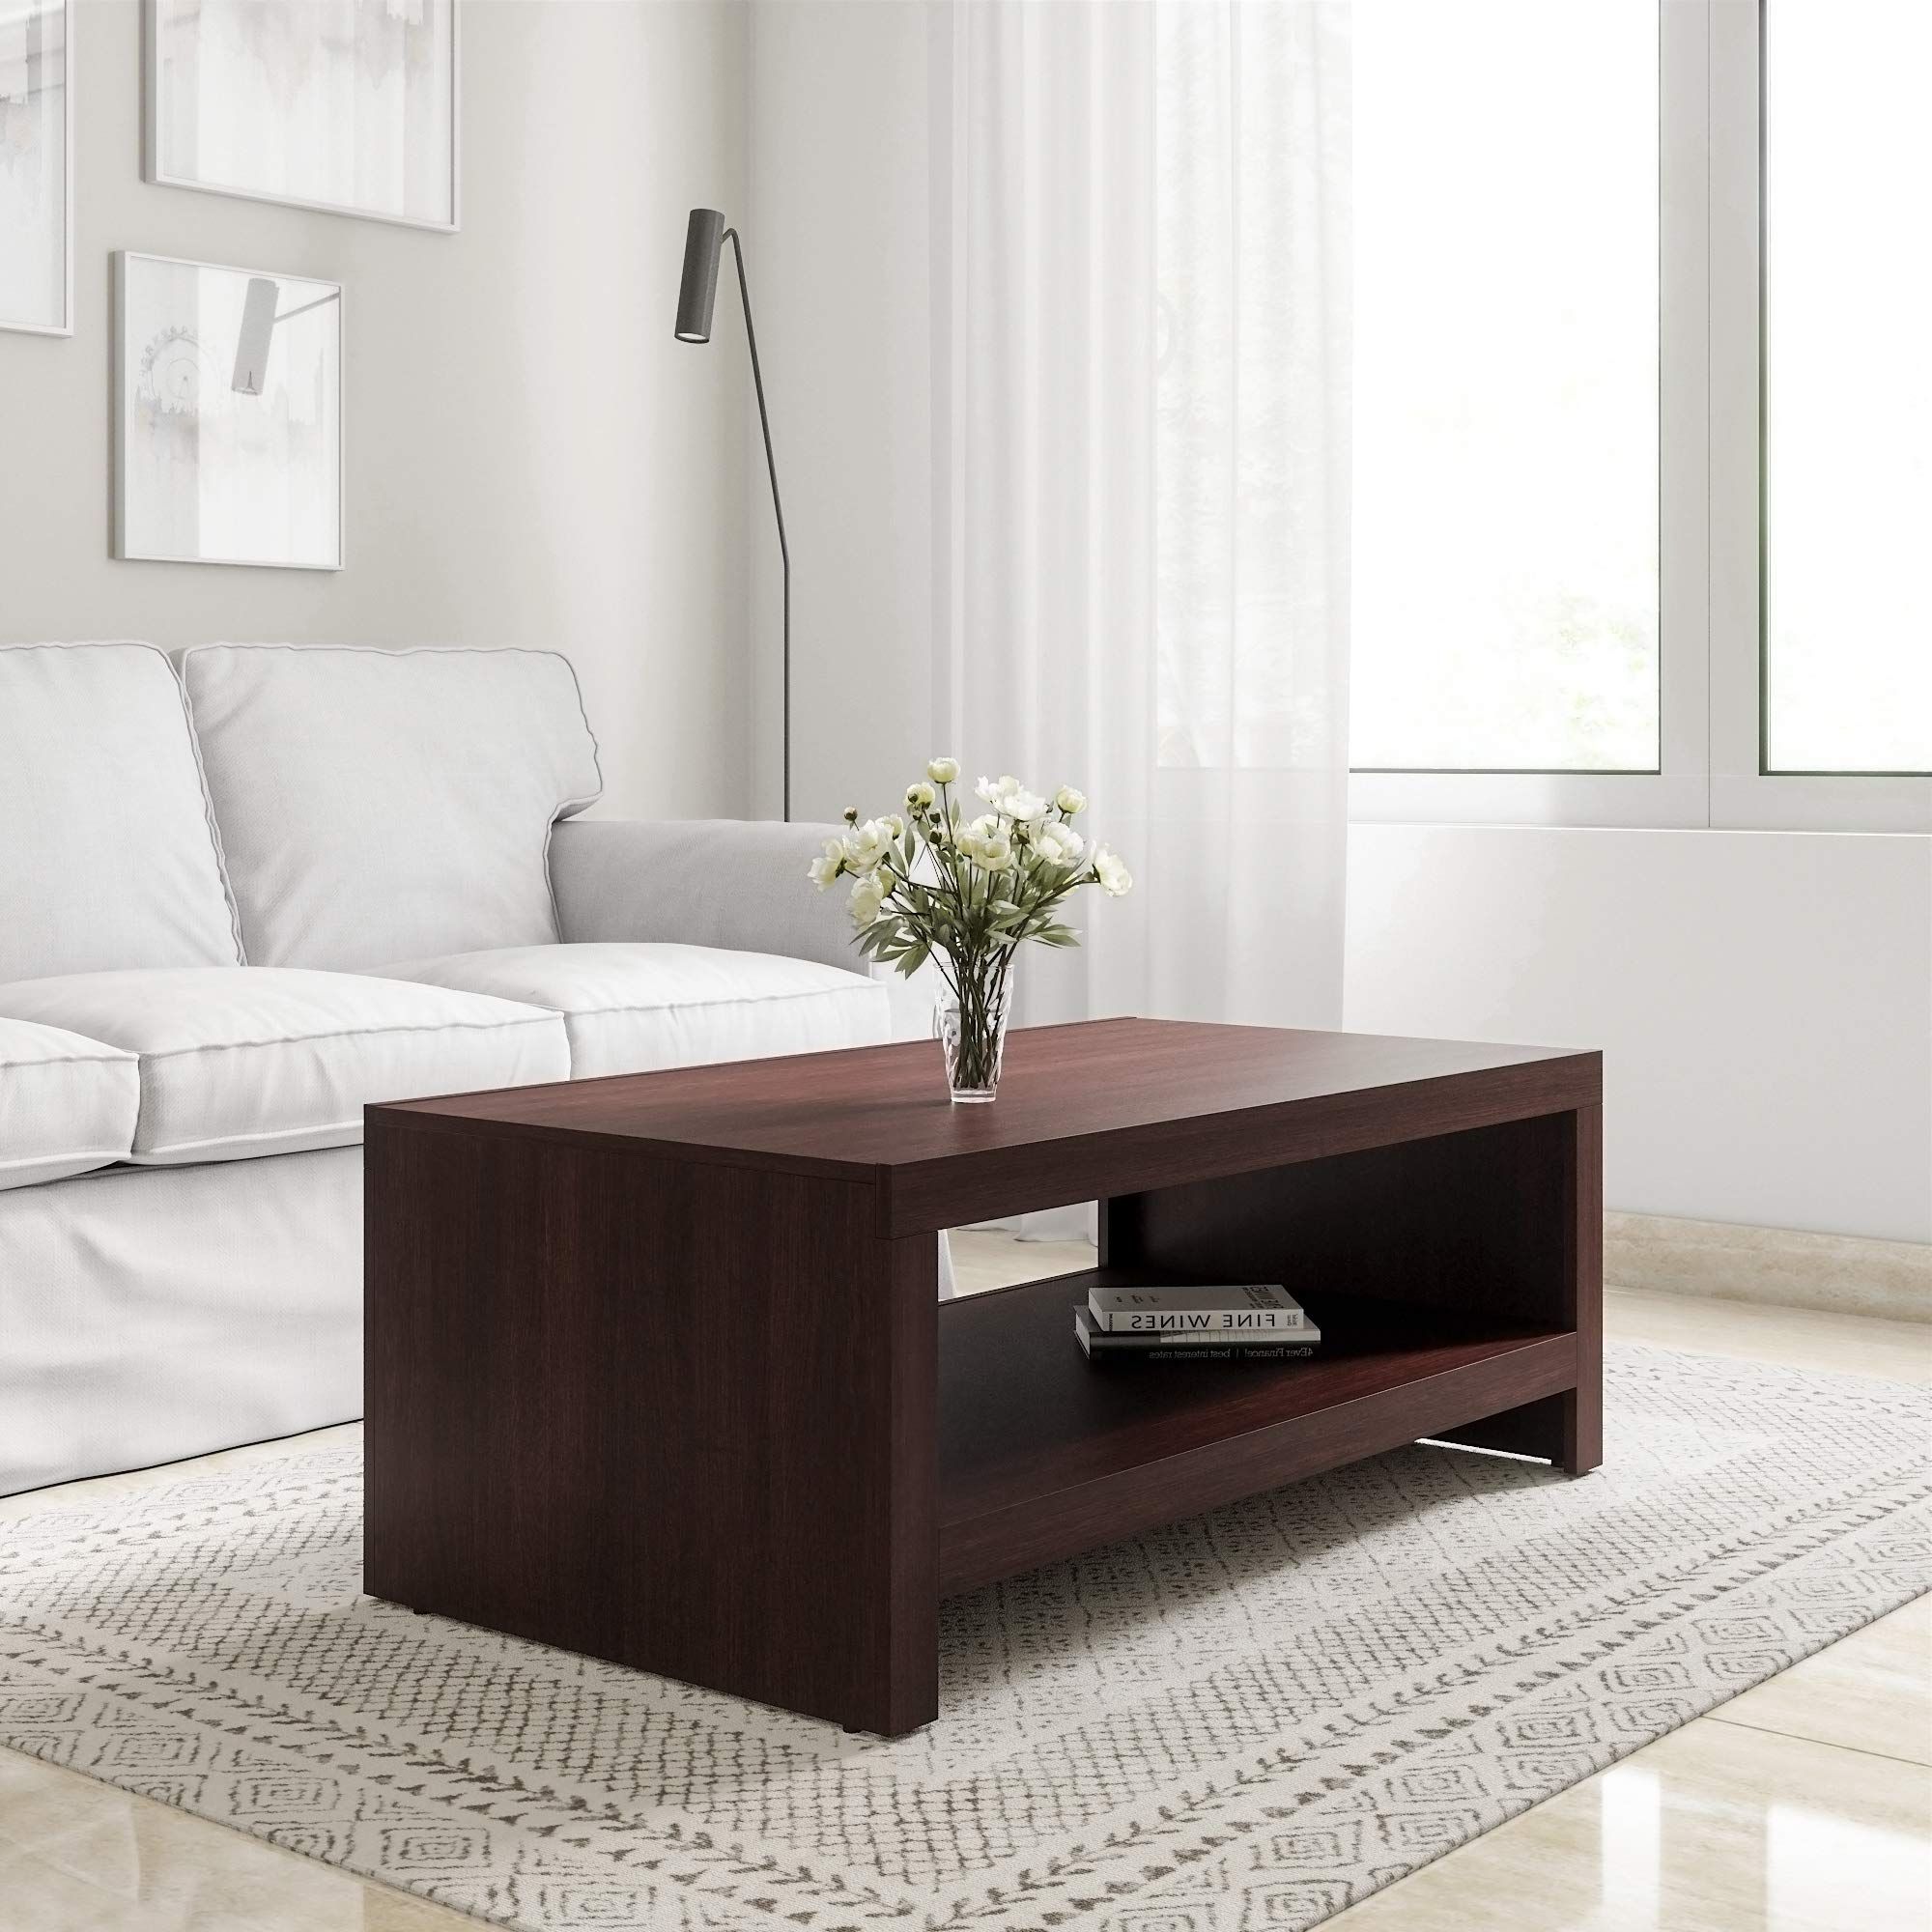 Well Liked Espresso Wood Finish Coffee Tables Within Amazon Brand – Solimo Capella Engineered Wood Espresso Finish Modern Coffee  Table (brown) : Amazon (View 2 of 10)